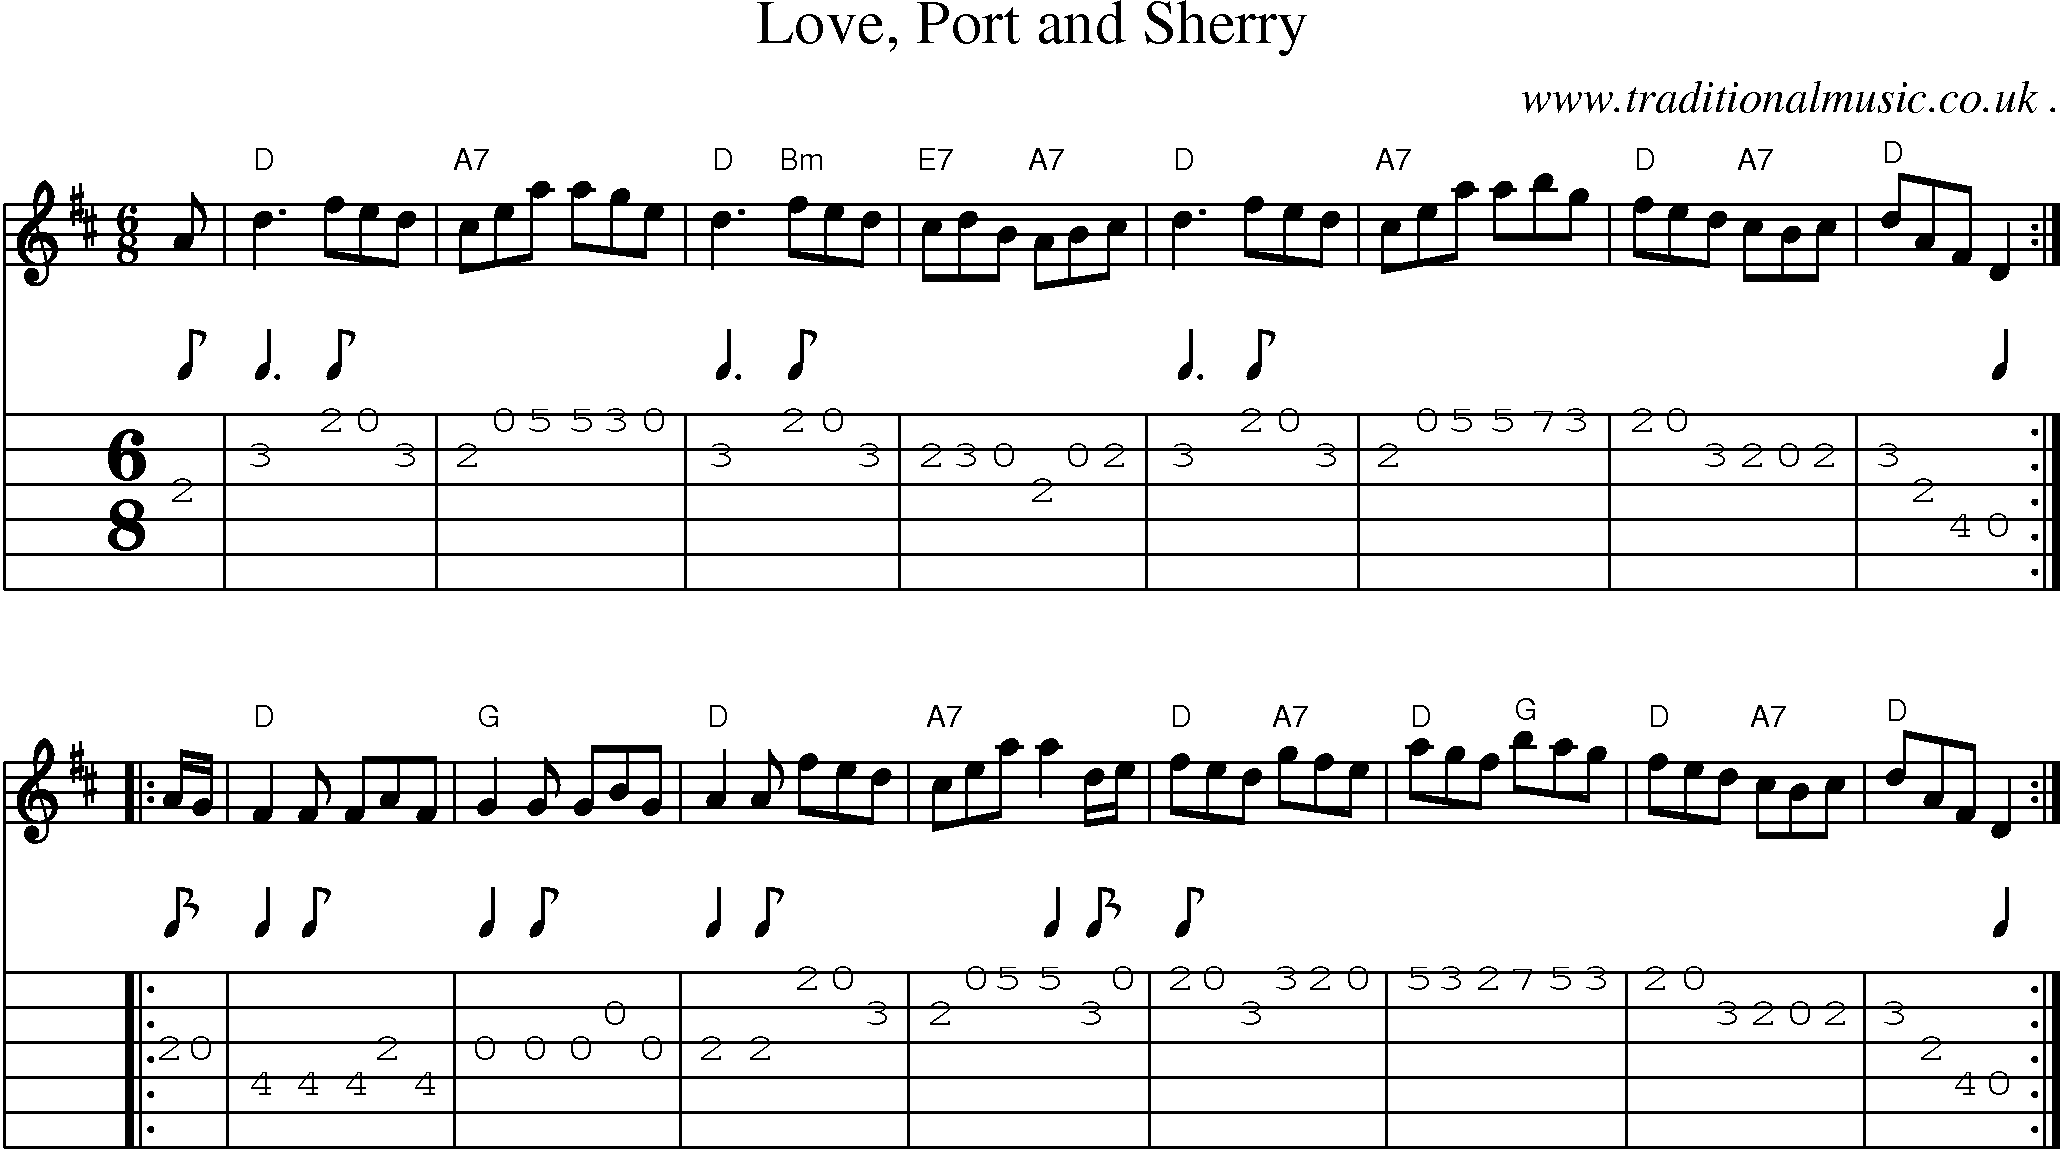 Sheet-music  score, Chords and Guitar Tabs for Love Port And Sherry